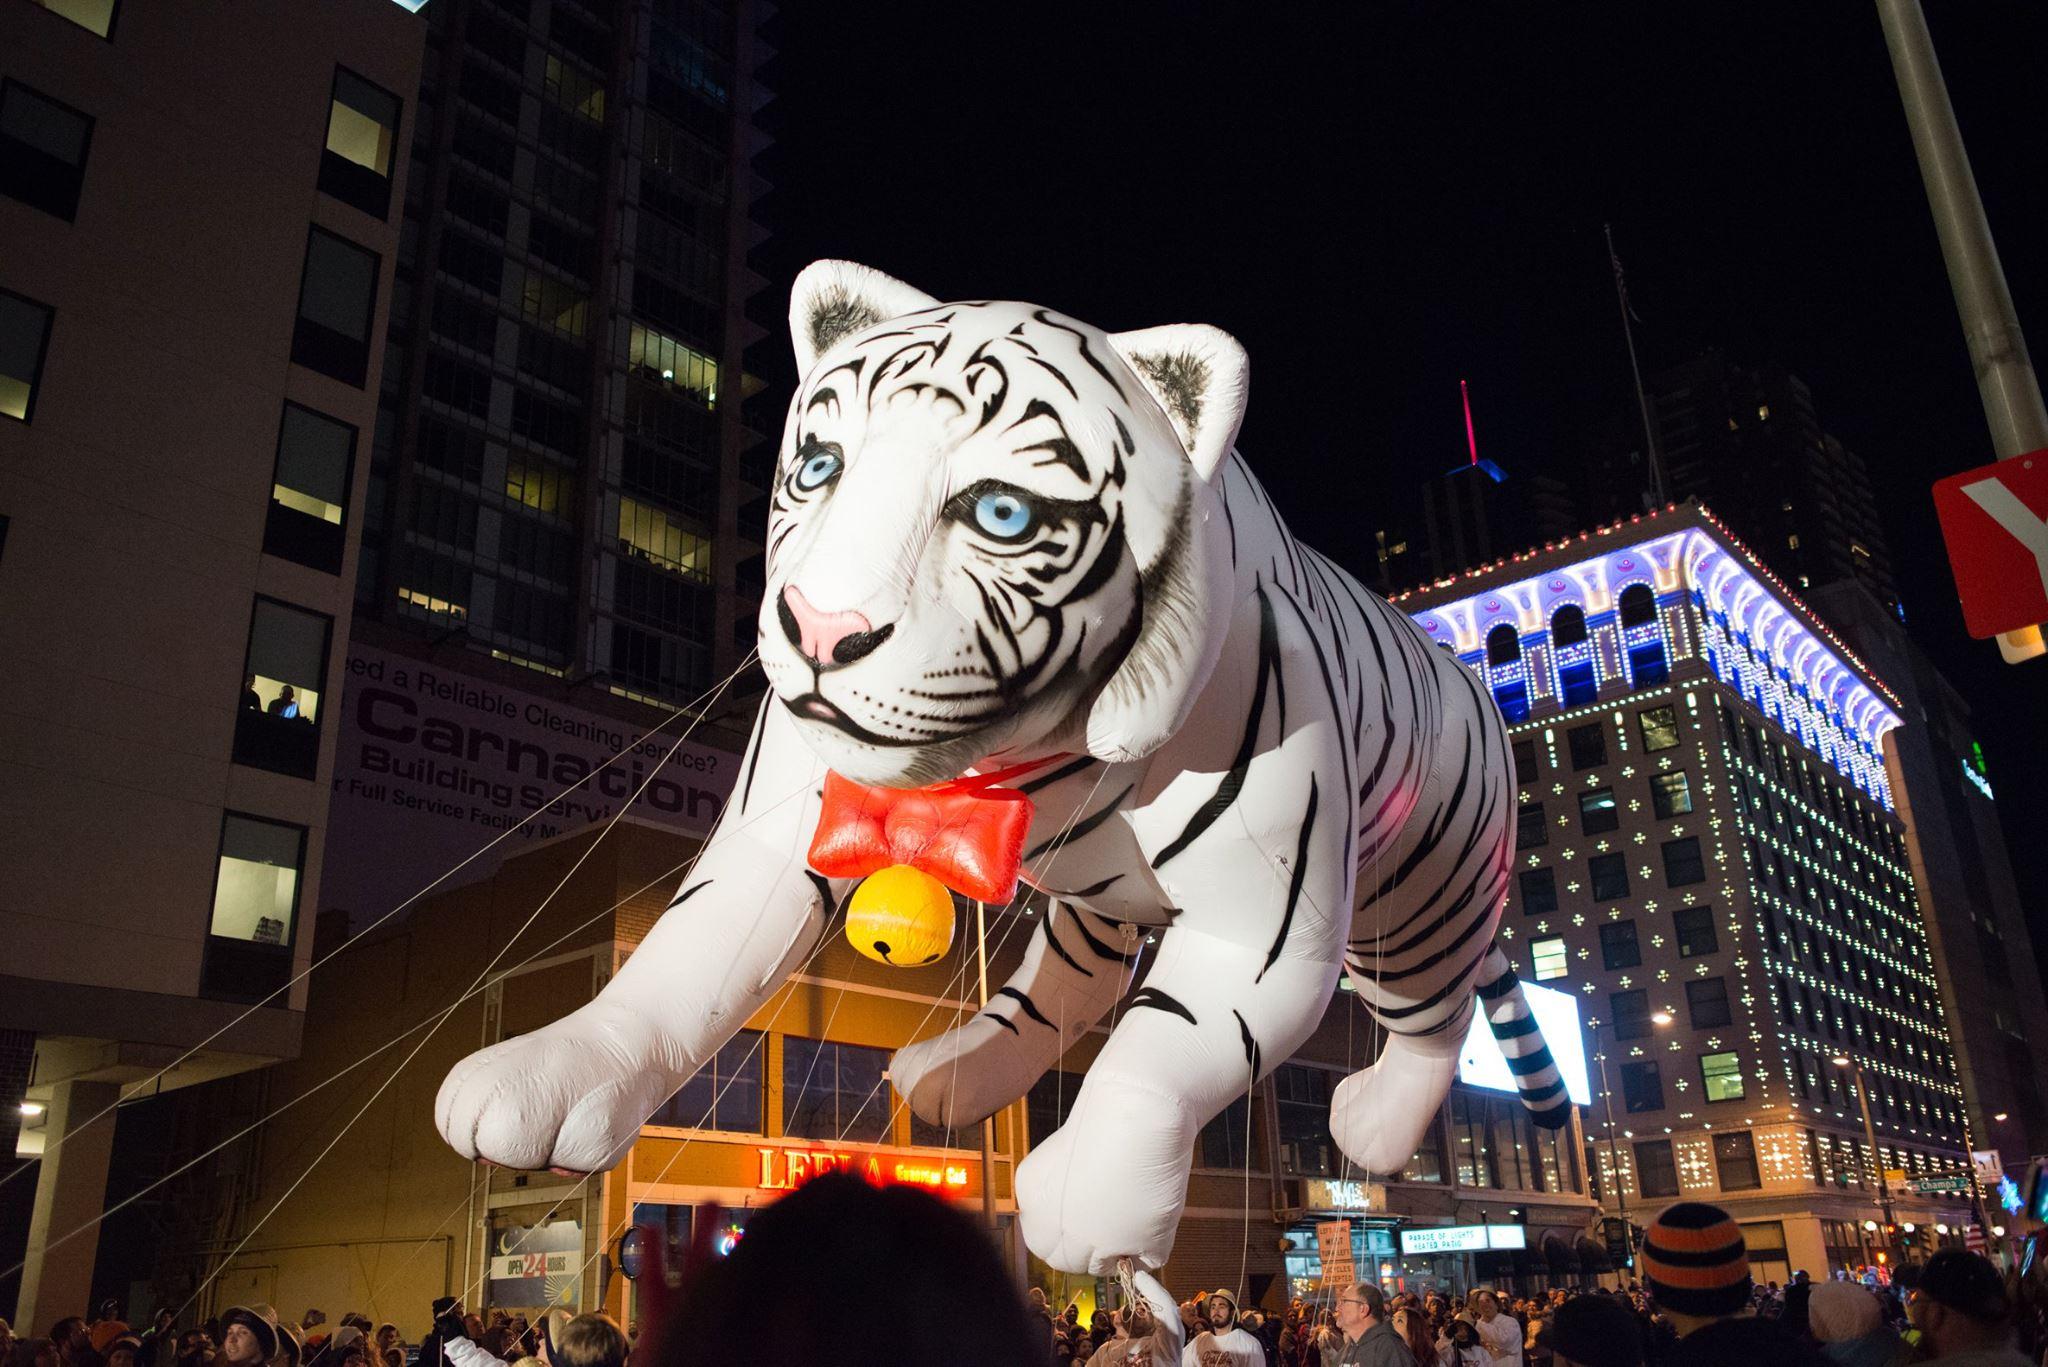 A snow tiger floats through the air at the 9NEWS Parade of Lights on Friday, December 4th, 2015 